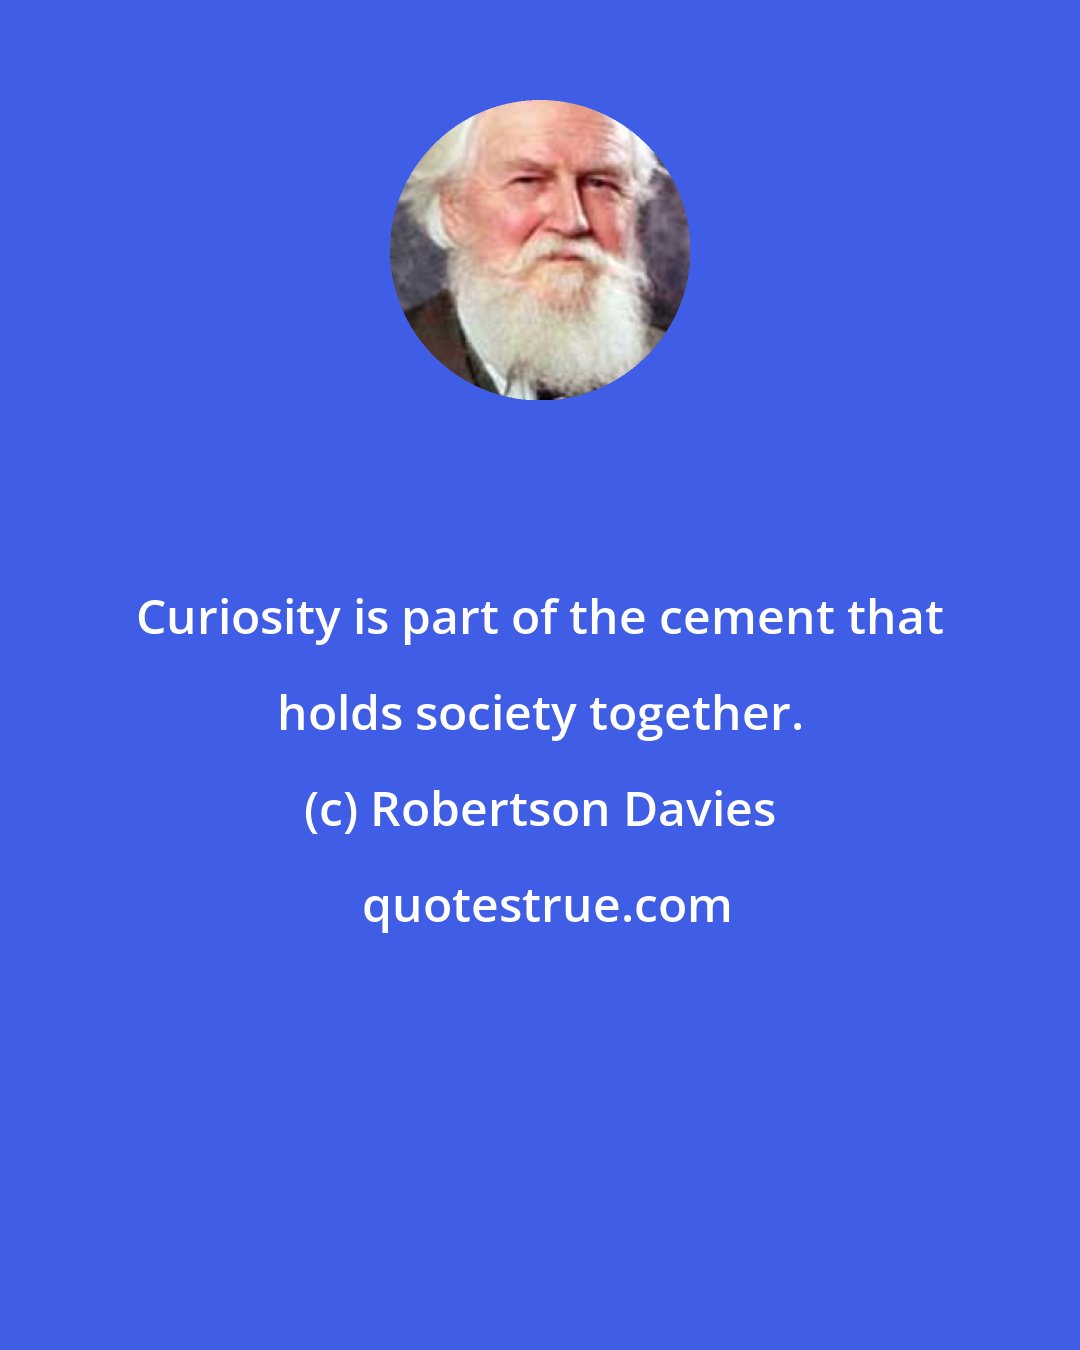 Robertson Davies: Curiosity is part of the cement that holds society together.